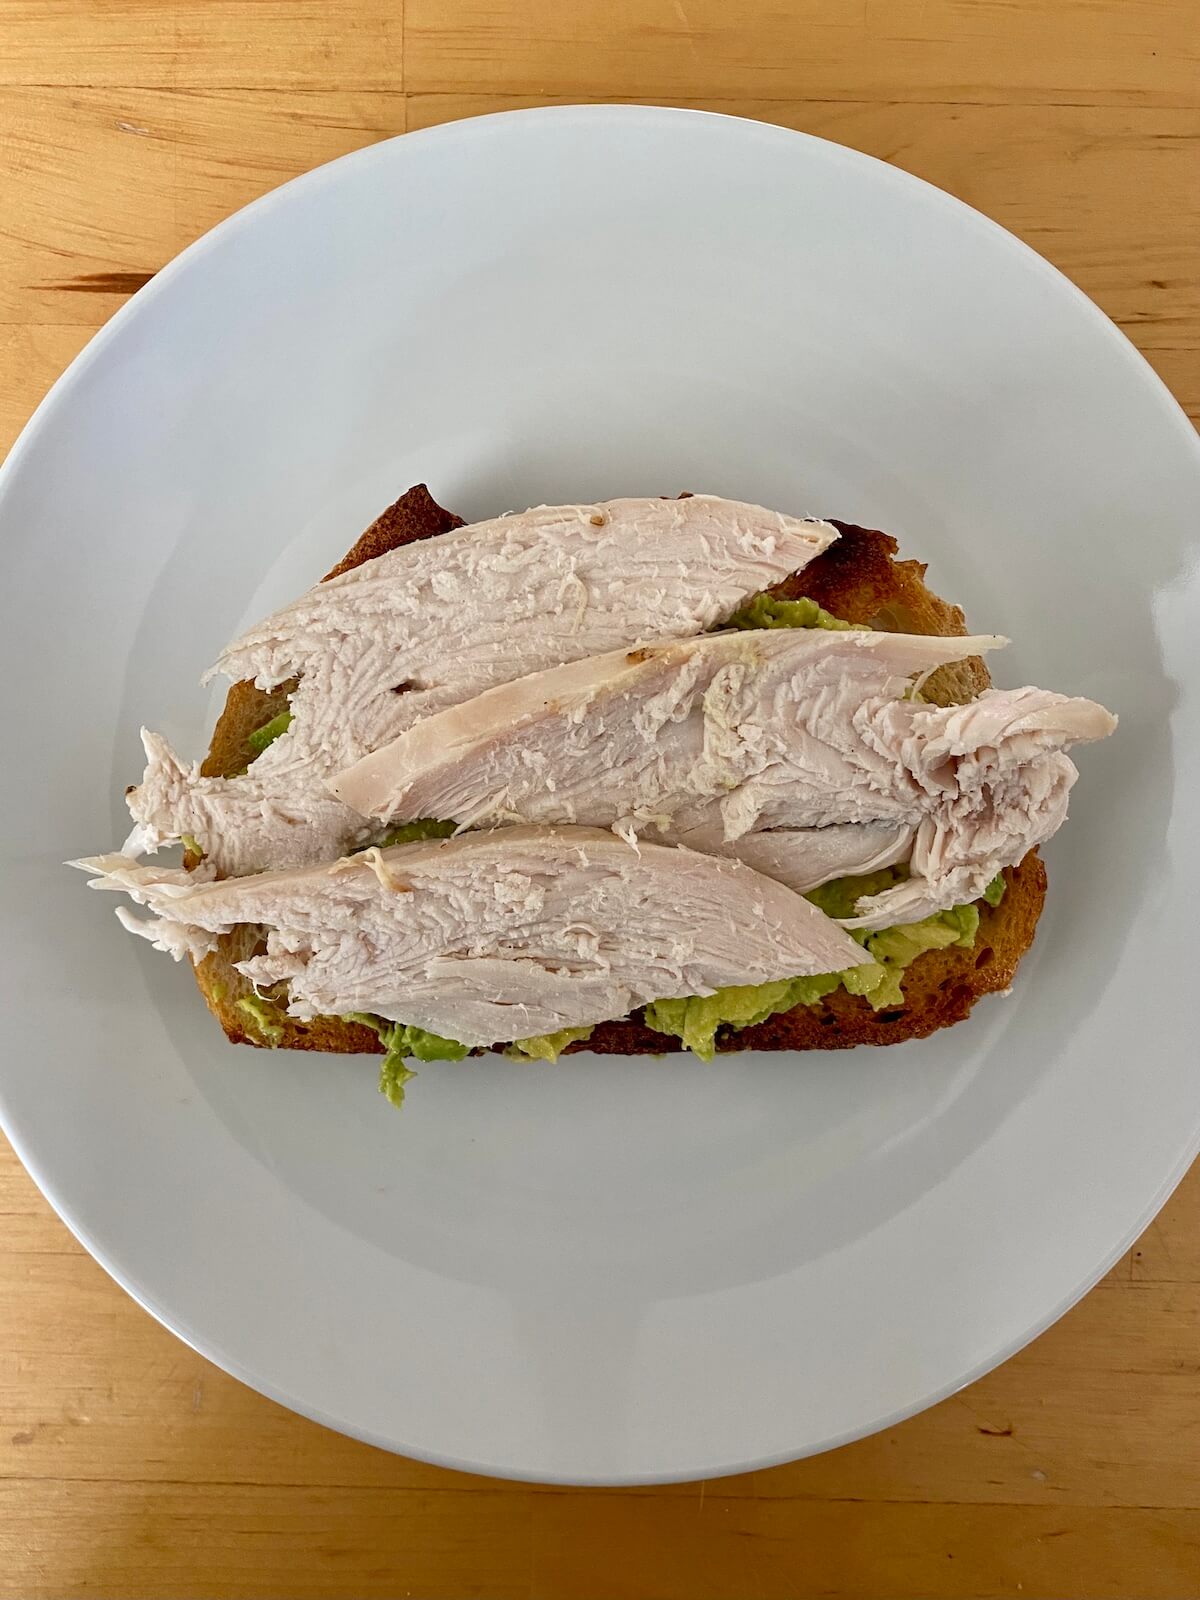 Mashed avocado and sliced roasted turkey breast on a piece of toasted sourdough bread.